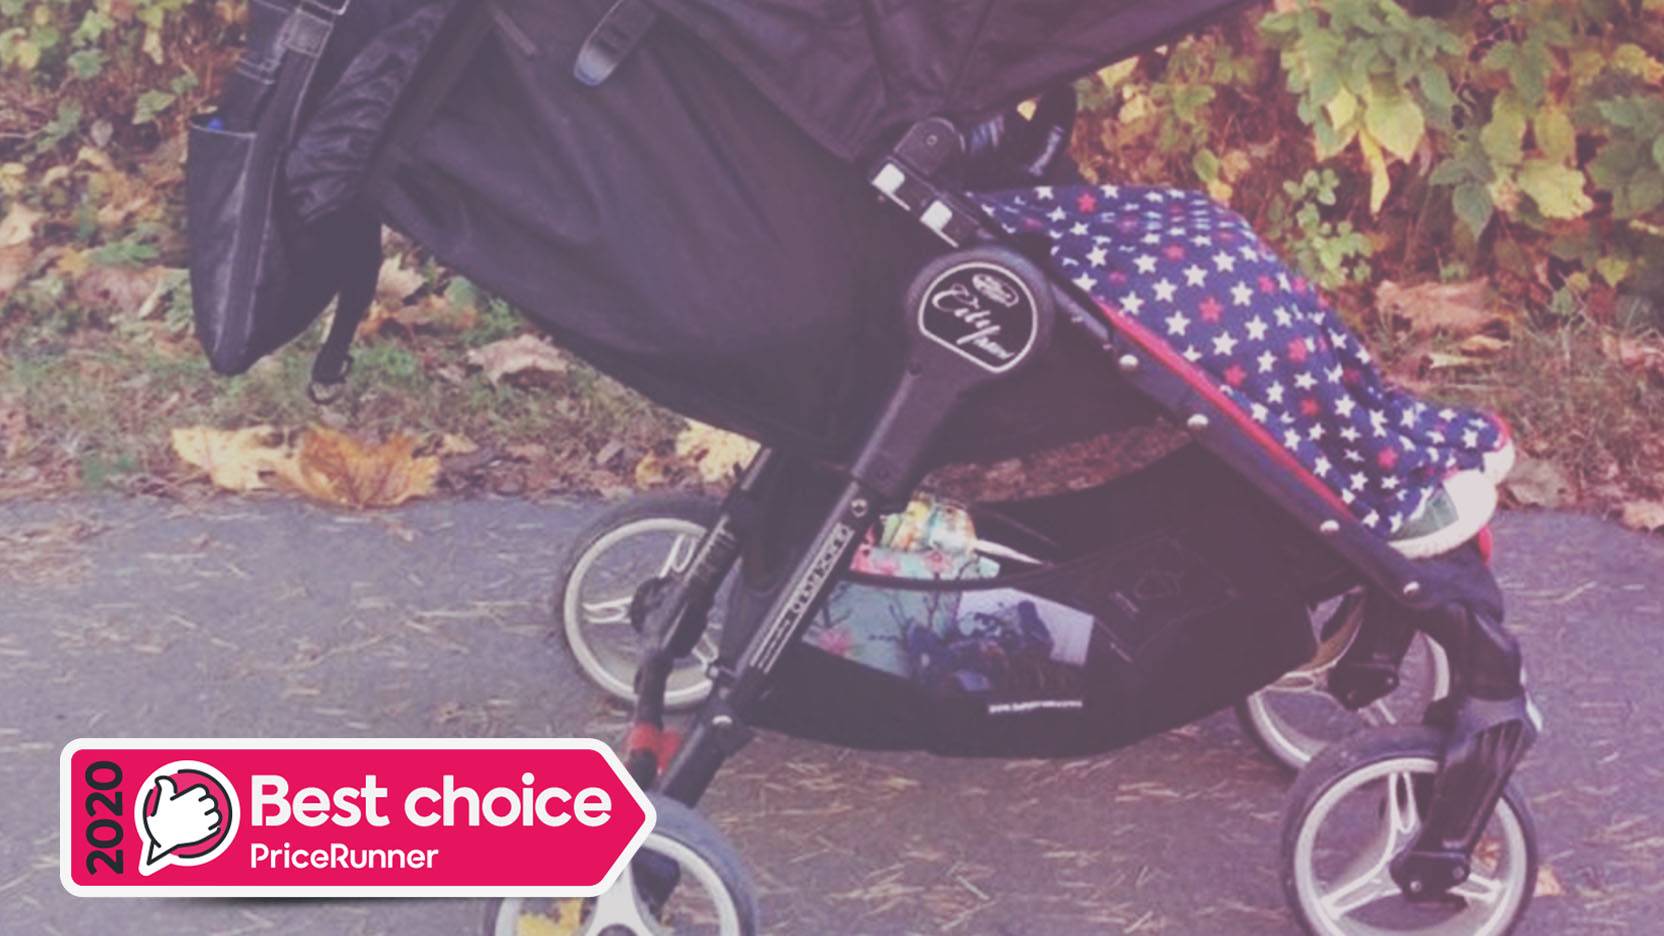 Top 10 Best Pushchairs of 2020 → Reviewed & Ranked